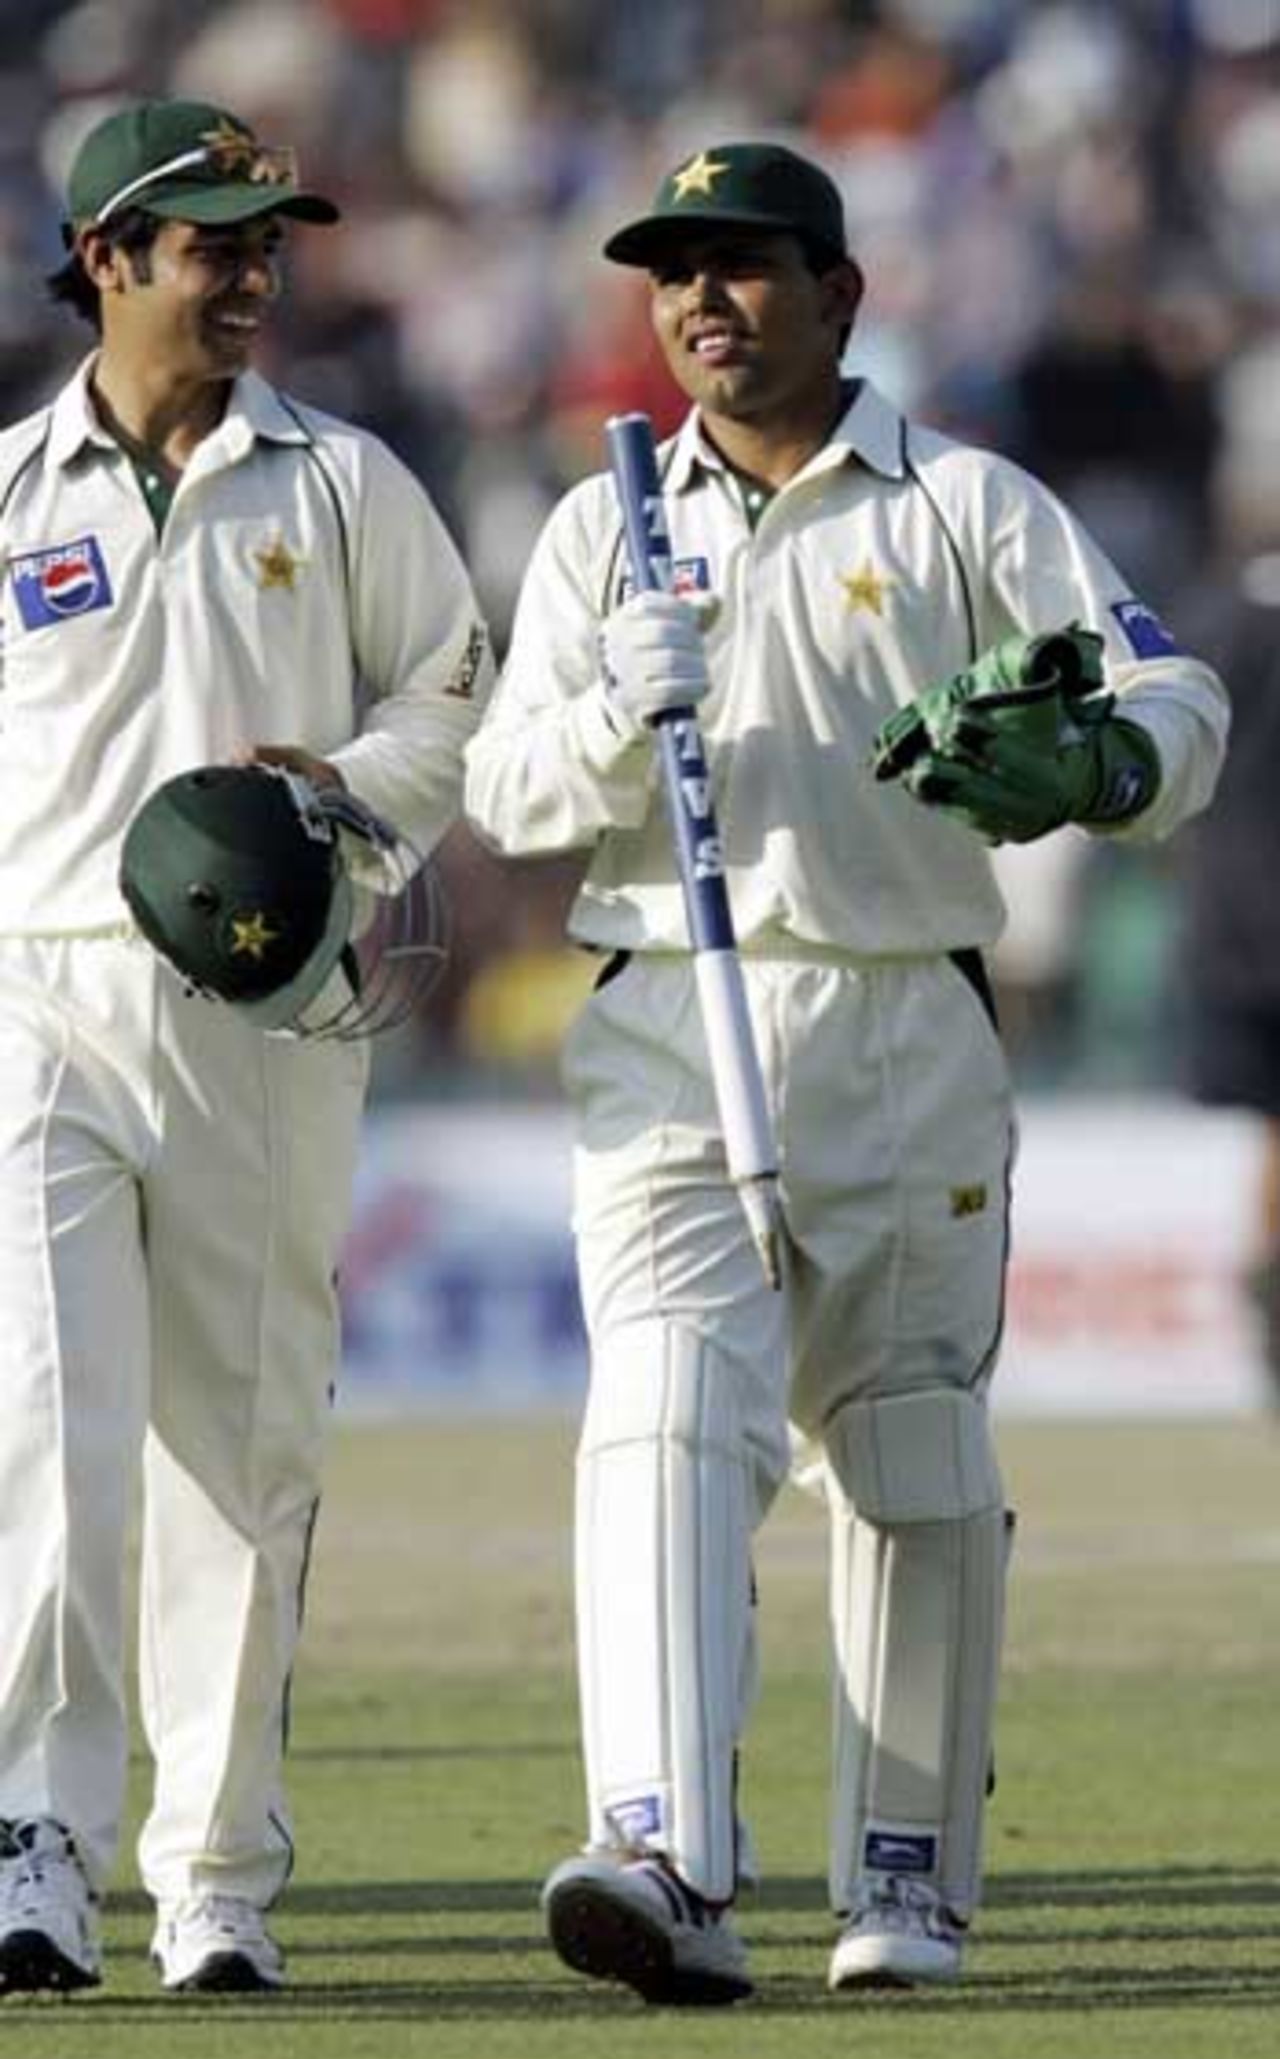 Kamran Akmal took a stump as a souvenir as the game ended in a draw. He will remember this Test for a long time to come, India v Pakistan, 1st Test, Mohali, 5th day, March 12, 2005